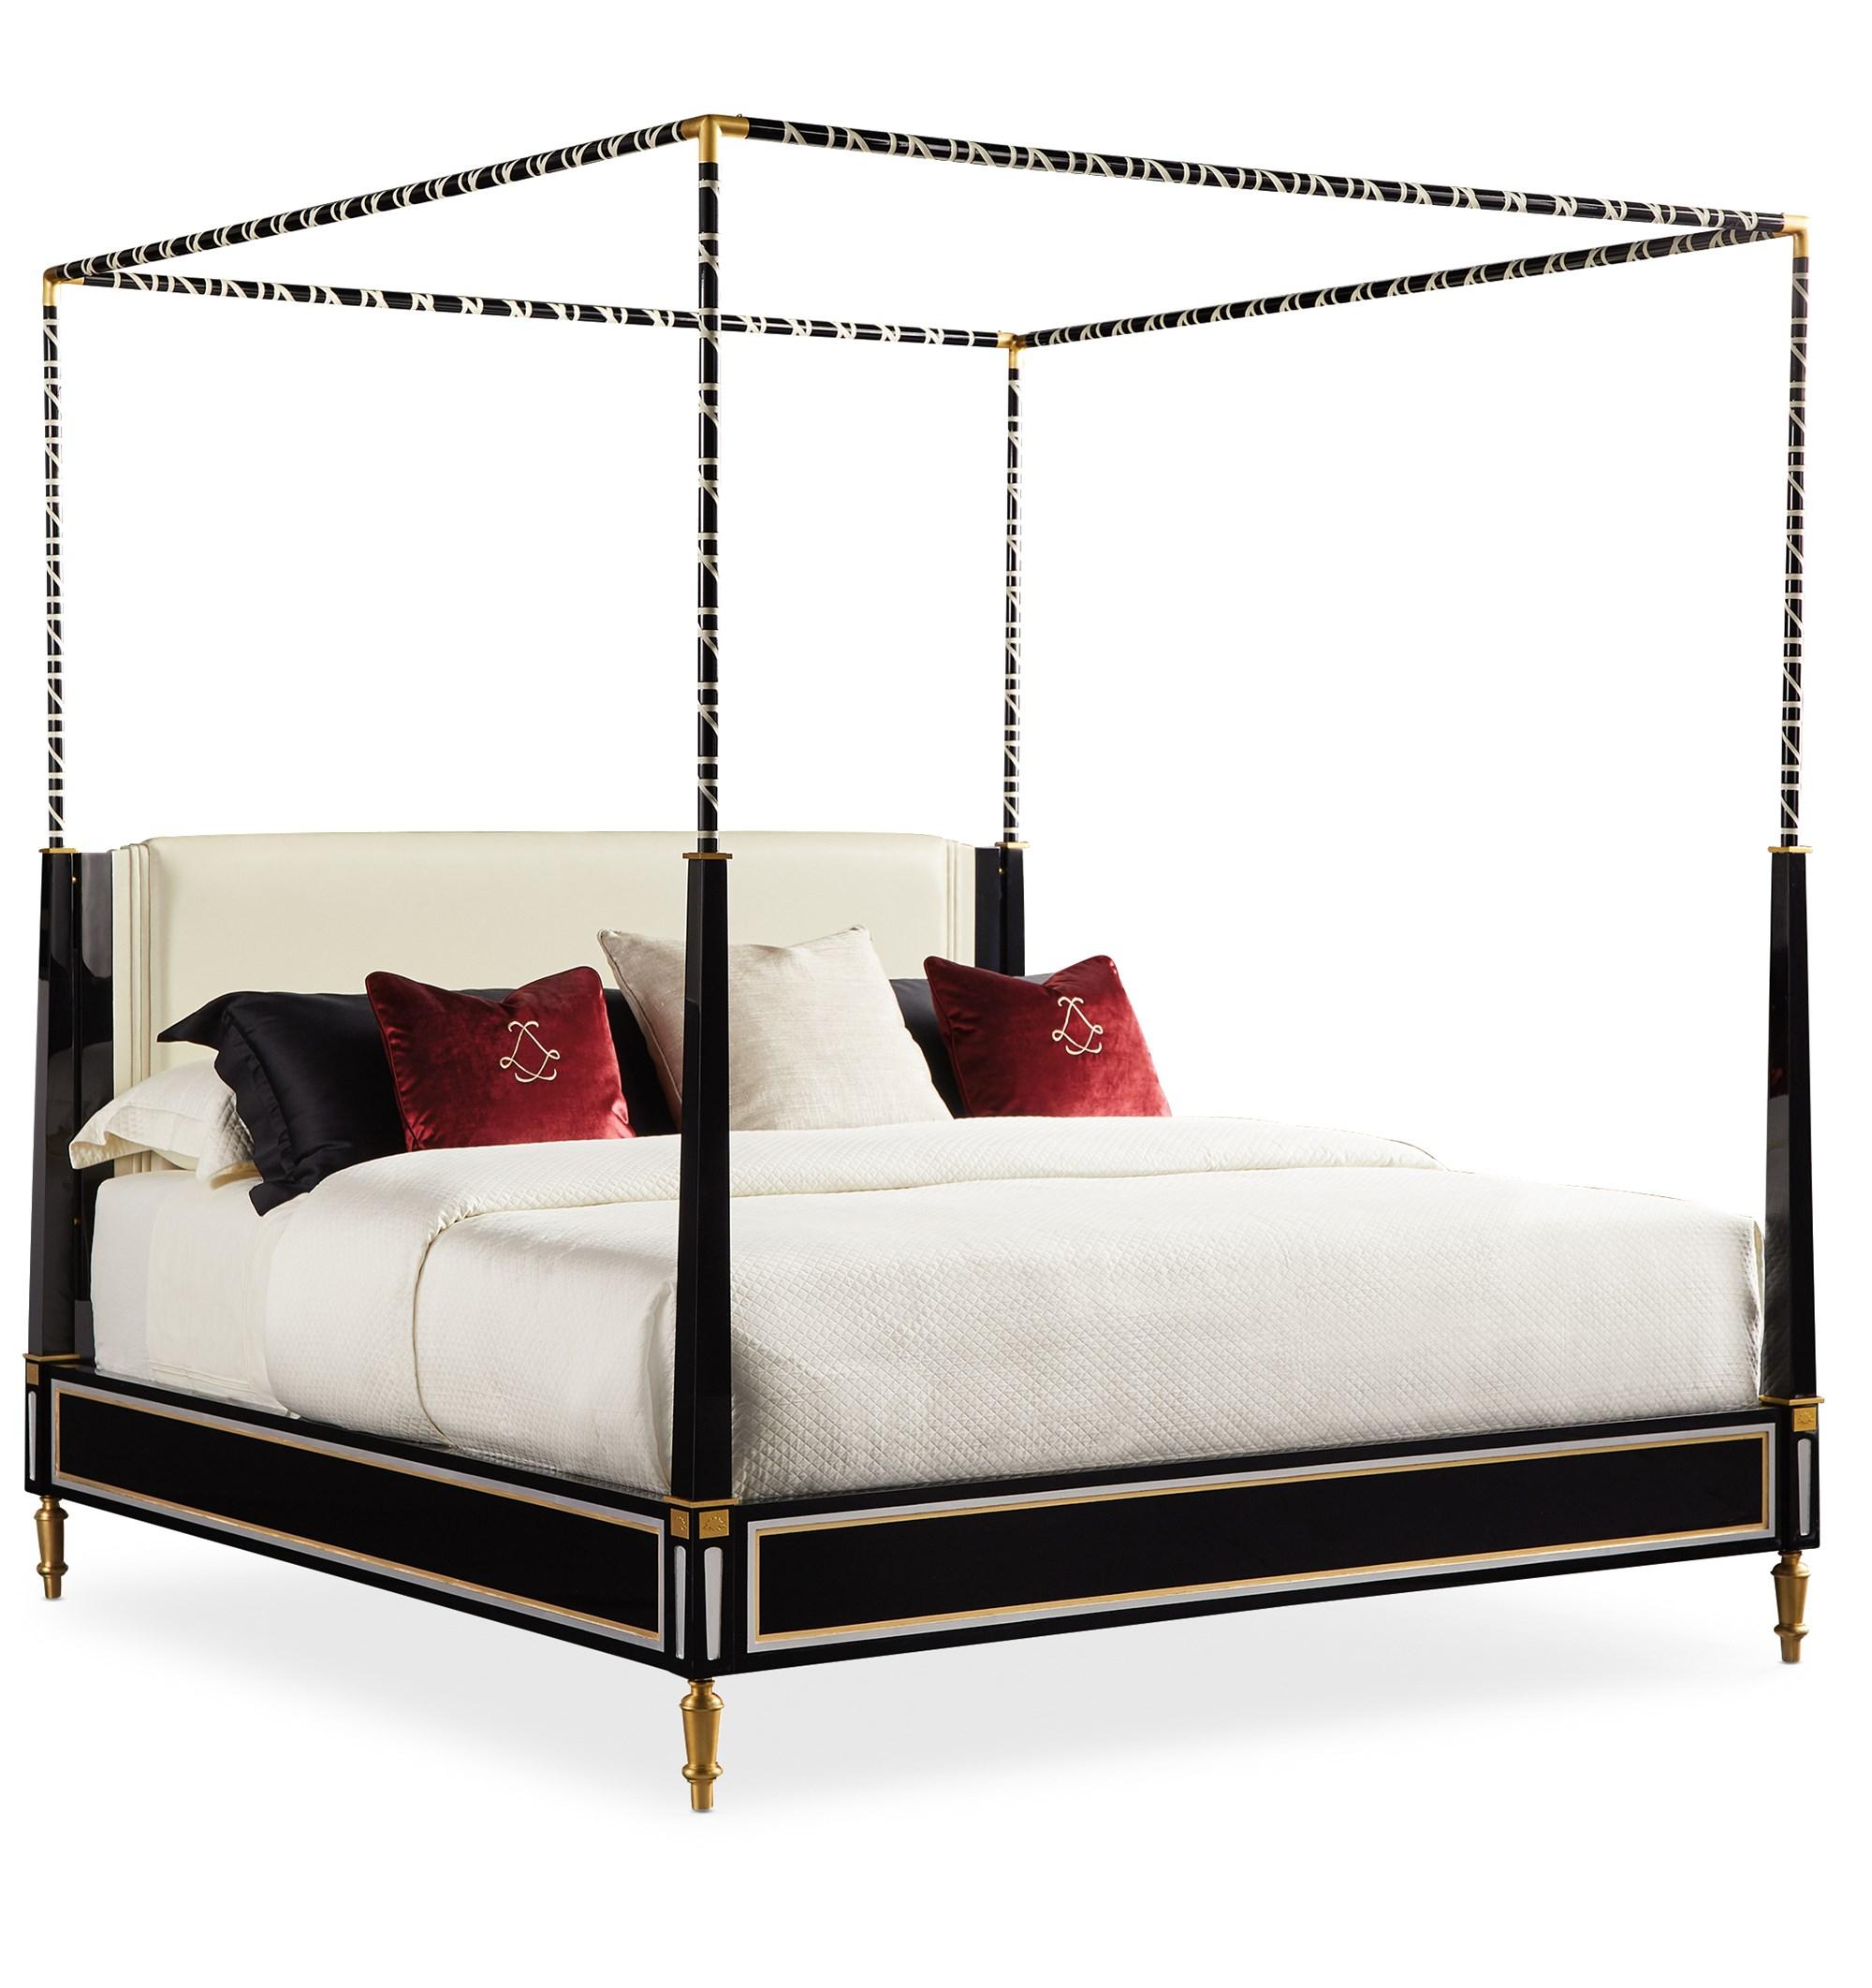 Contemporary Canopy Bed THE COUTURIER CANOPY BED SIG-419-122 in Black Finish, Cream 